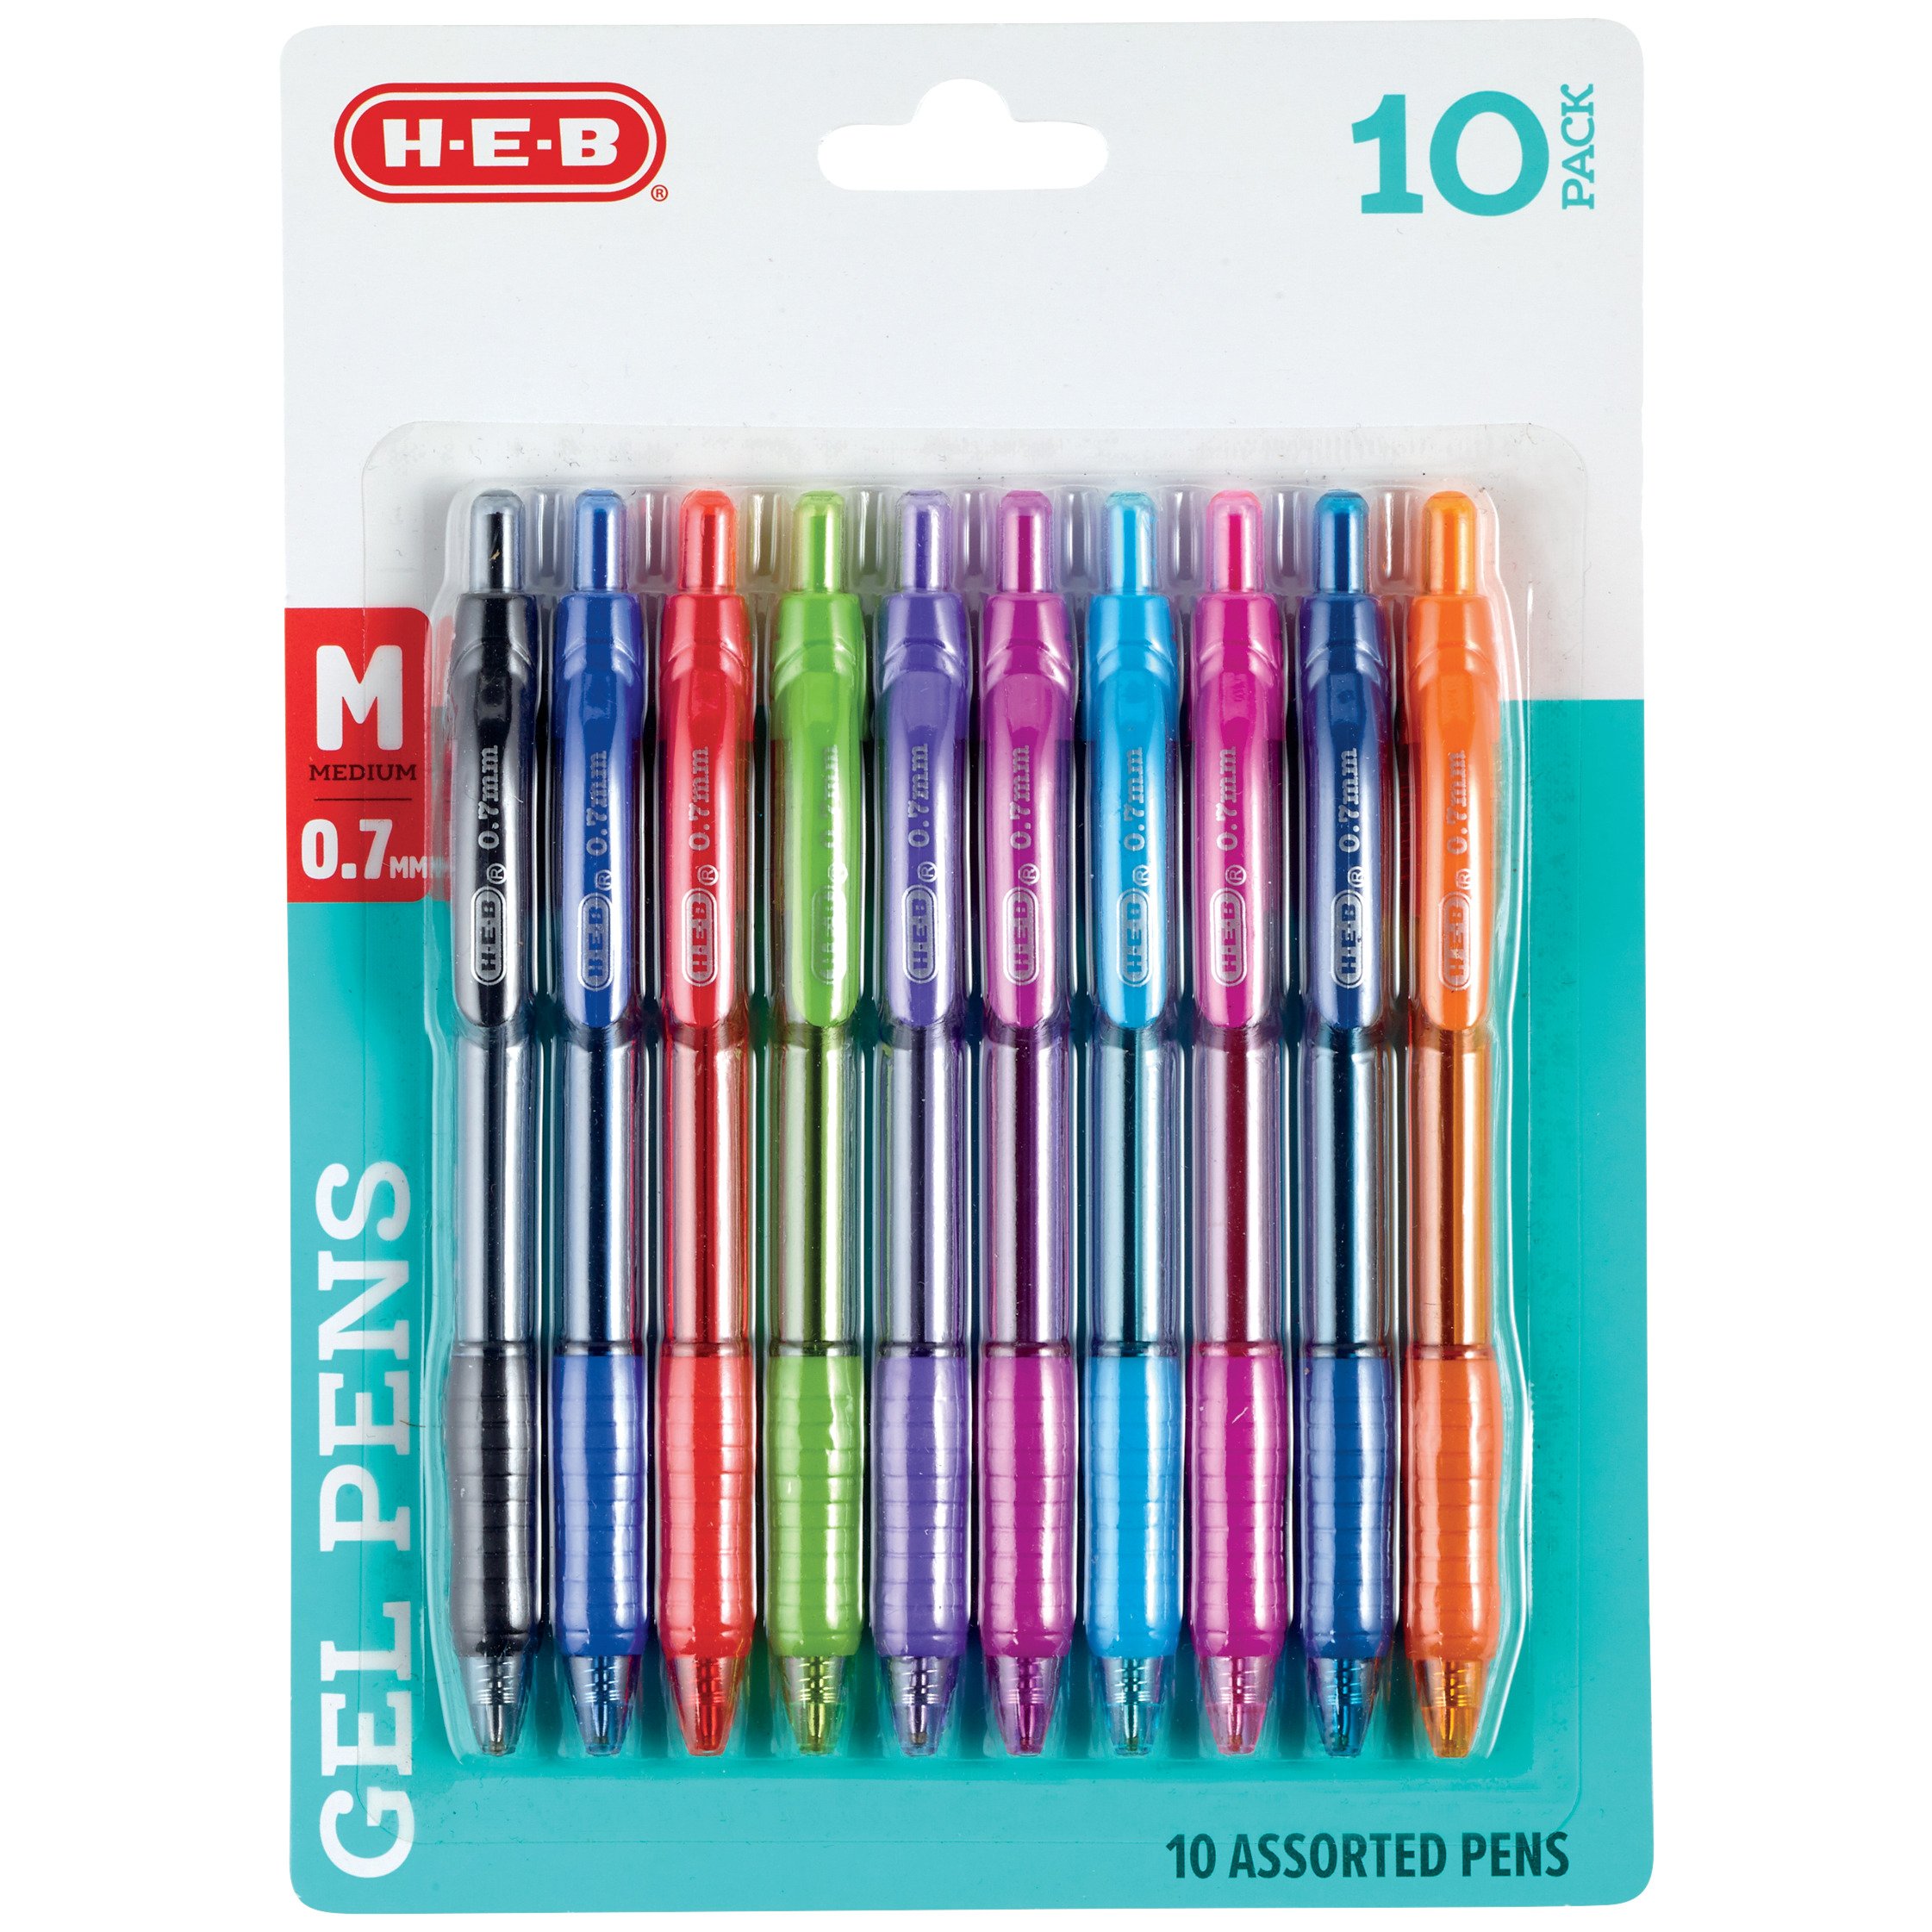 H-E-B Retractable Gel Pens with Grip - Assorted Ink